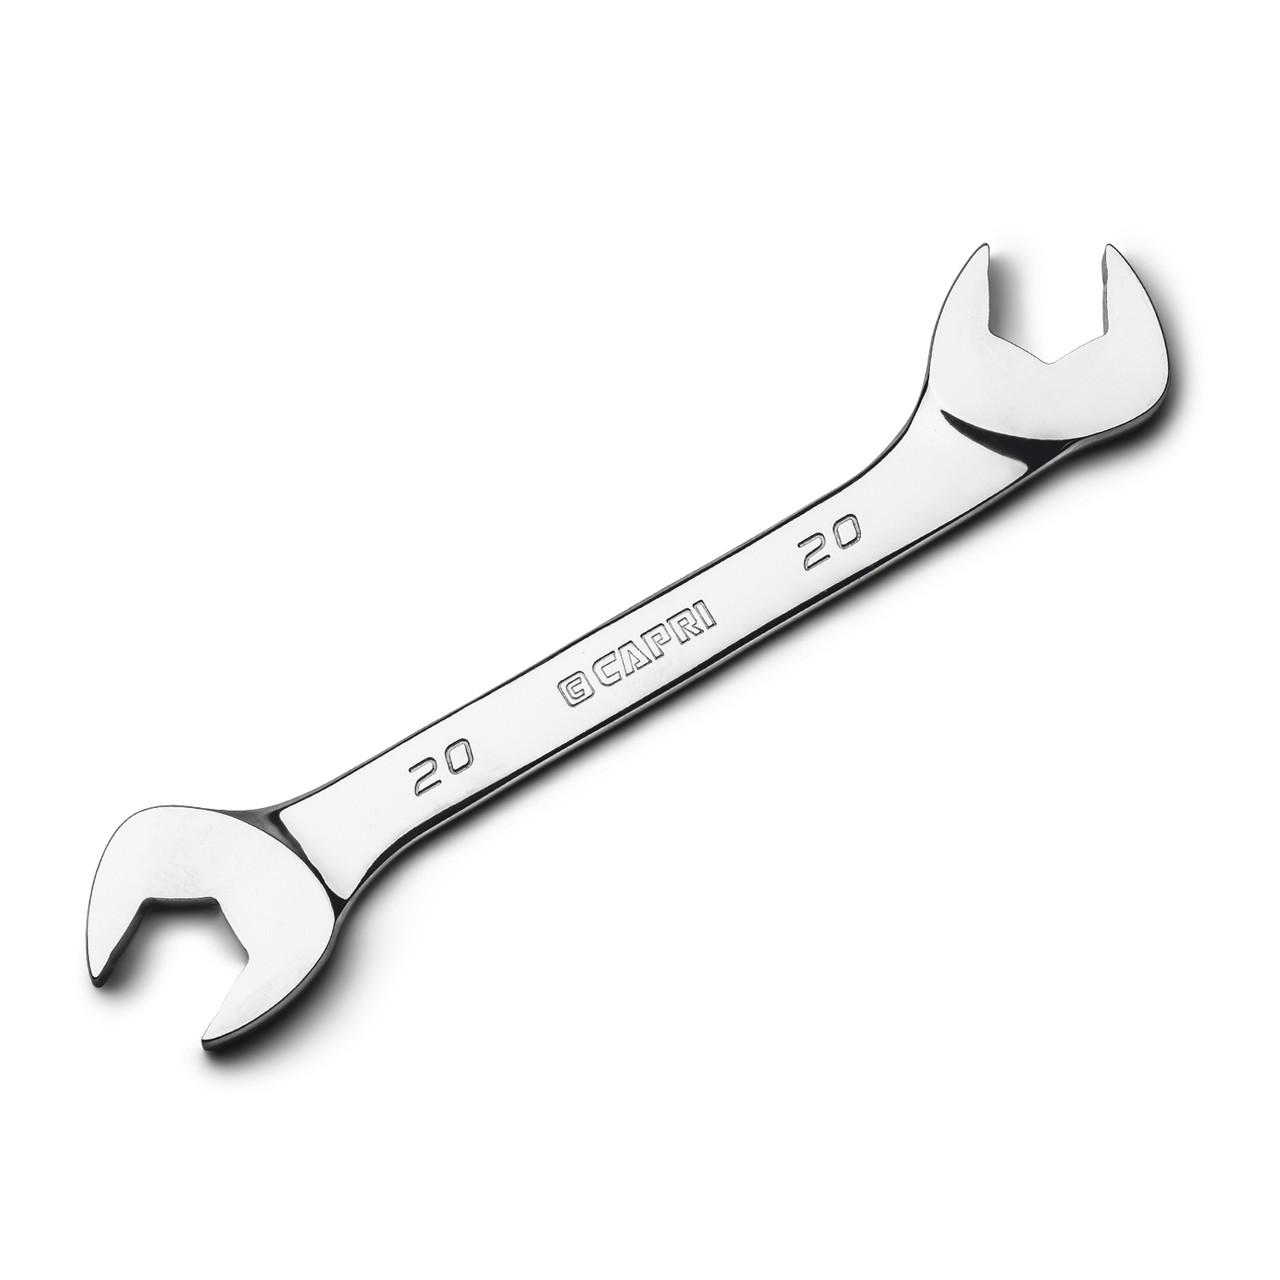 Capri Tools 20 mm Angle Open End Wrench, 30° and 60° angles, Metric